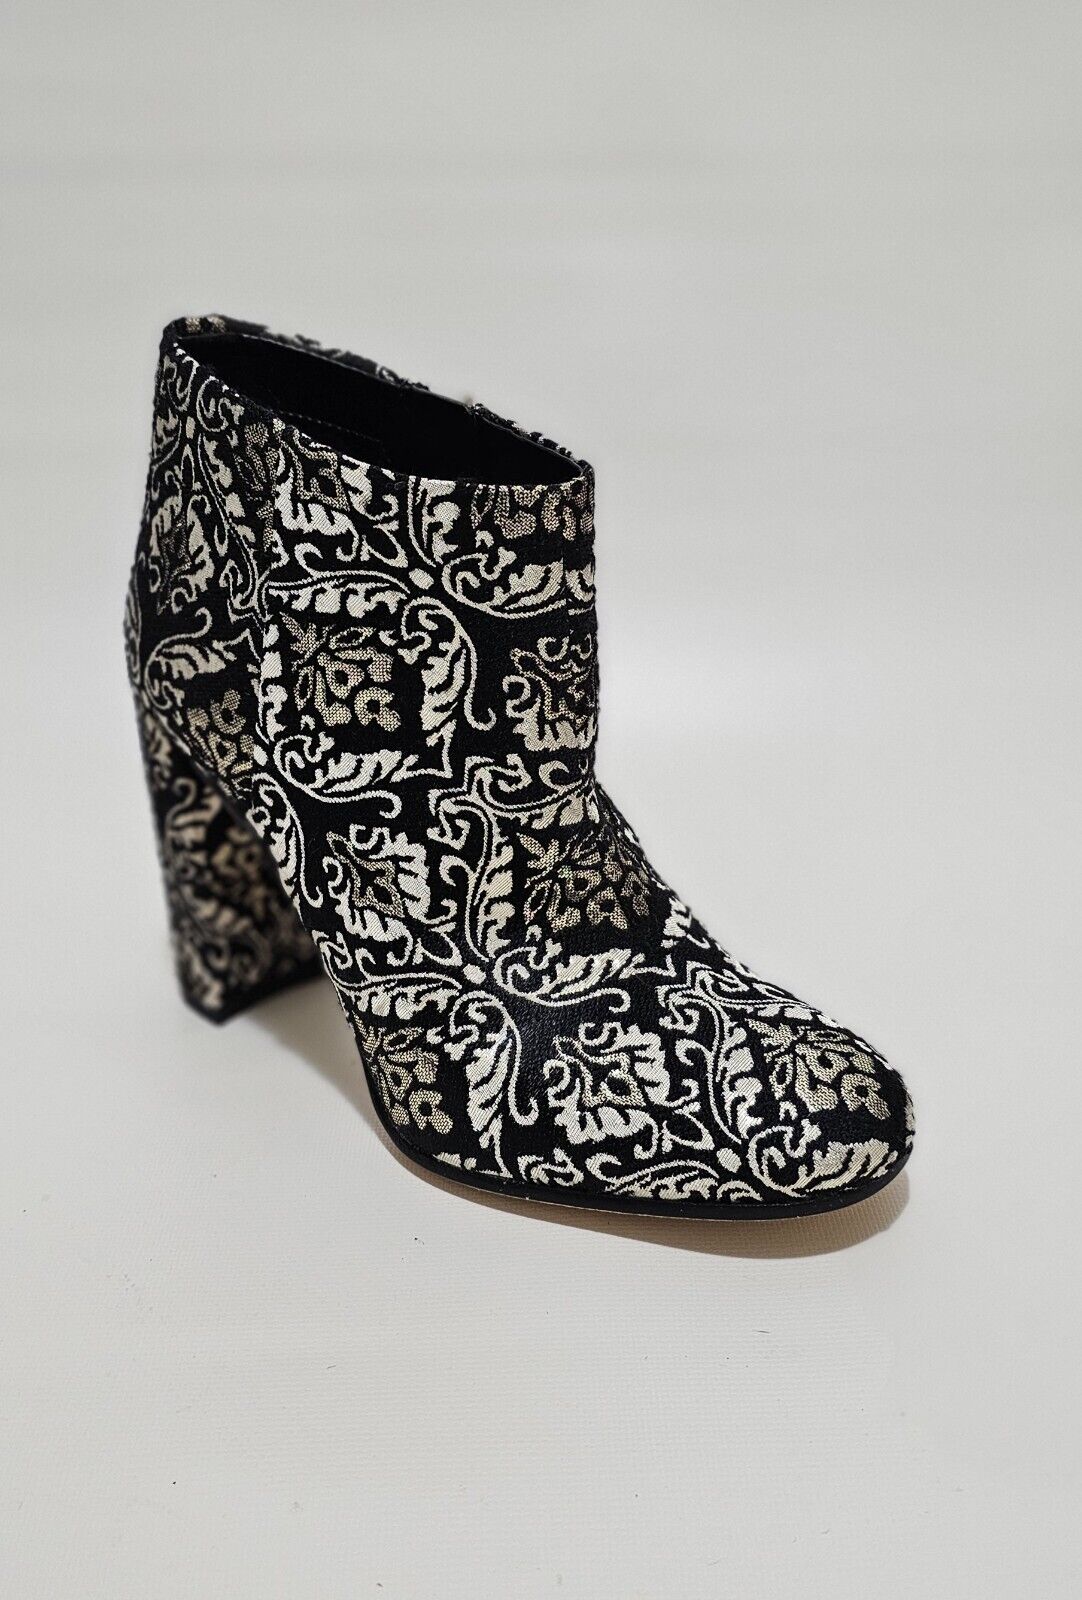 Sam Edelman Women's Cambell Black/Gold Damask Jacquard Ankle Boots Size US 6